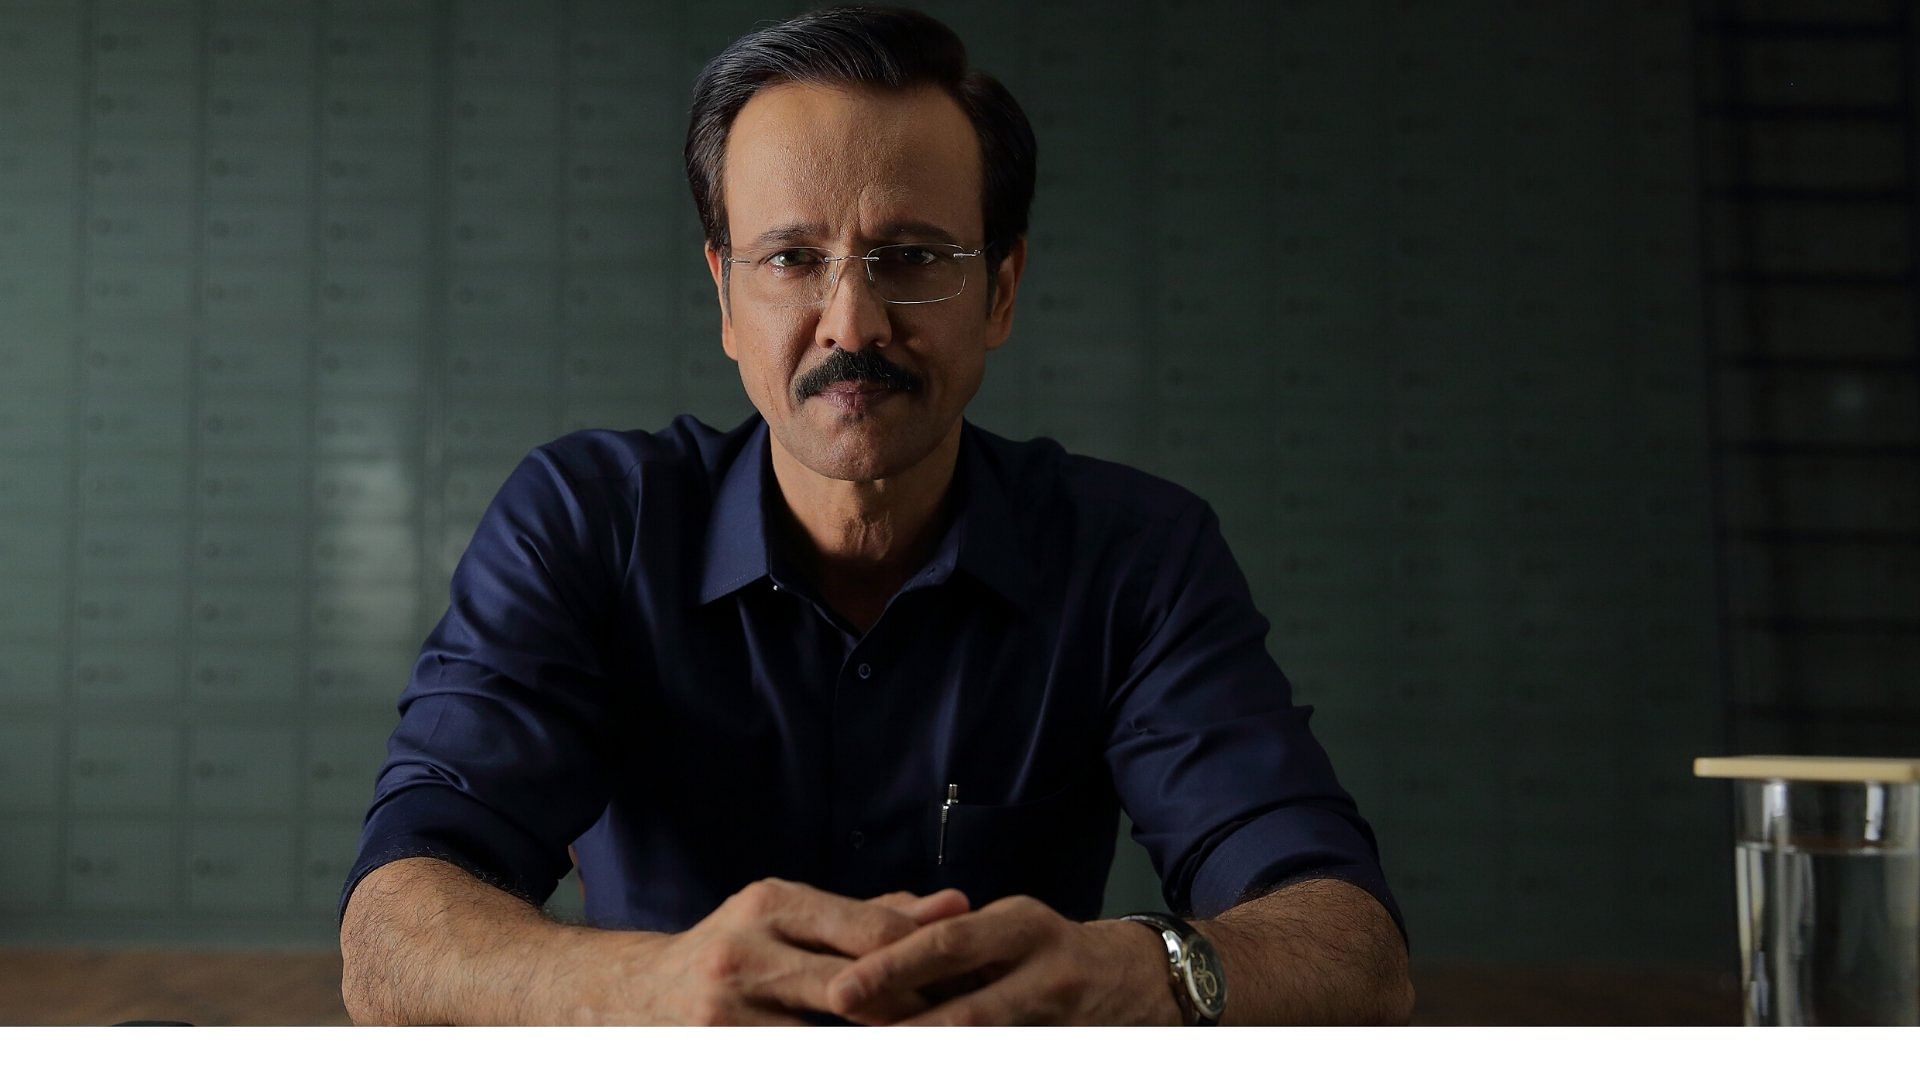 Kay Kay Menon plays a RAW agent on the show.